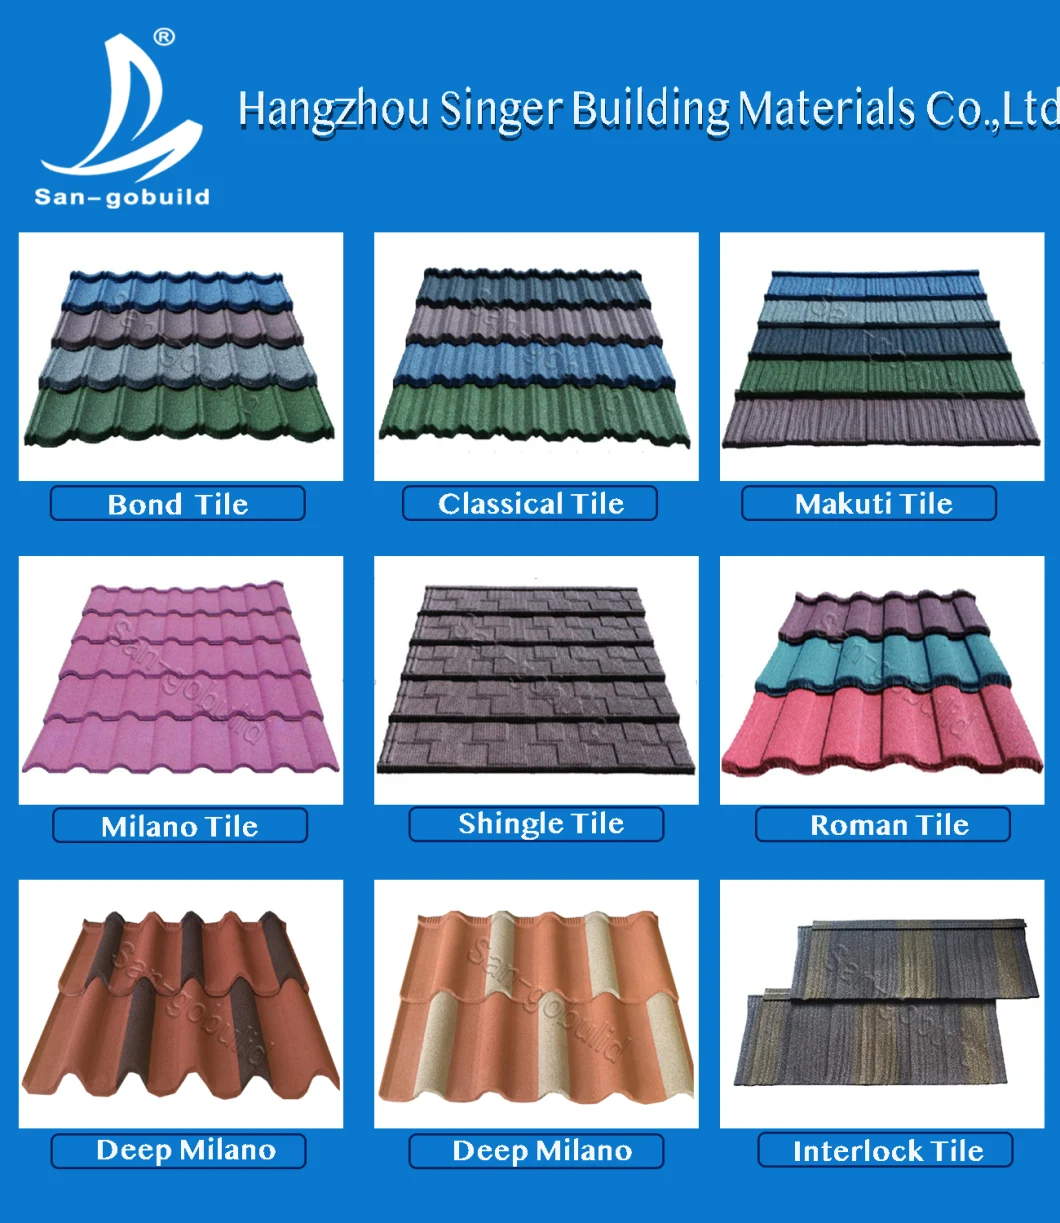 Wholesale Price New Roofing Designs Stone Coated Metal Roofing Sheet to Zambia Bangladesh Nigeria Africa